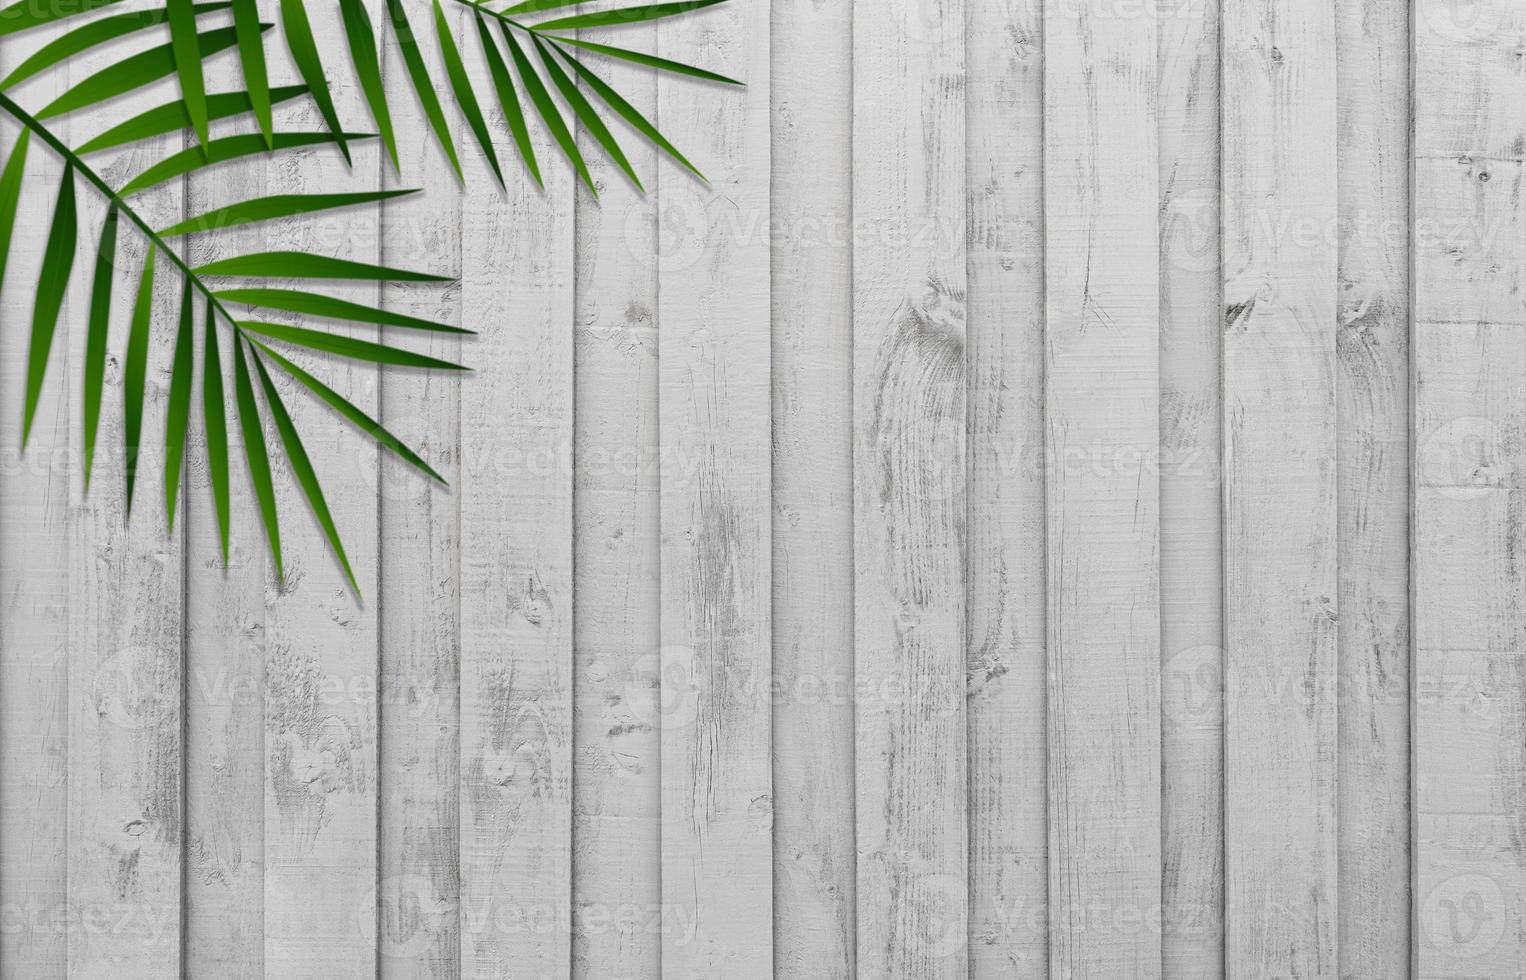 White Wood with blurry coconut palm leaves background,Blurred Green Branches of leaf on Washed wooden texture, Vintage garden fence wall surface,Wide horizon Background plank table for product Present photo